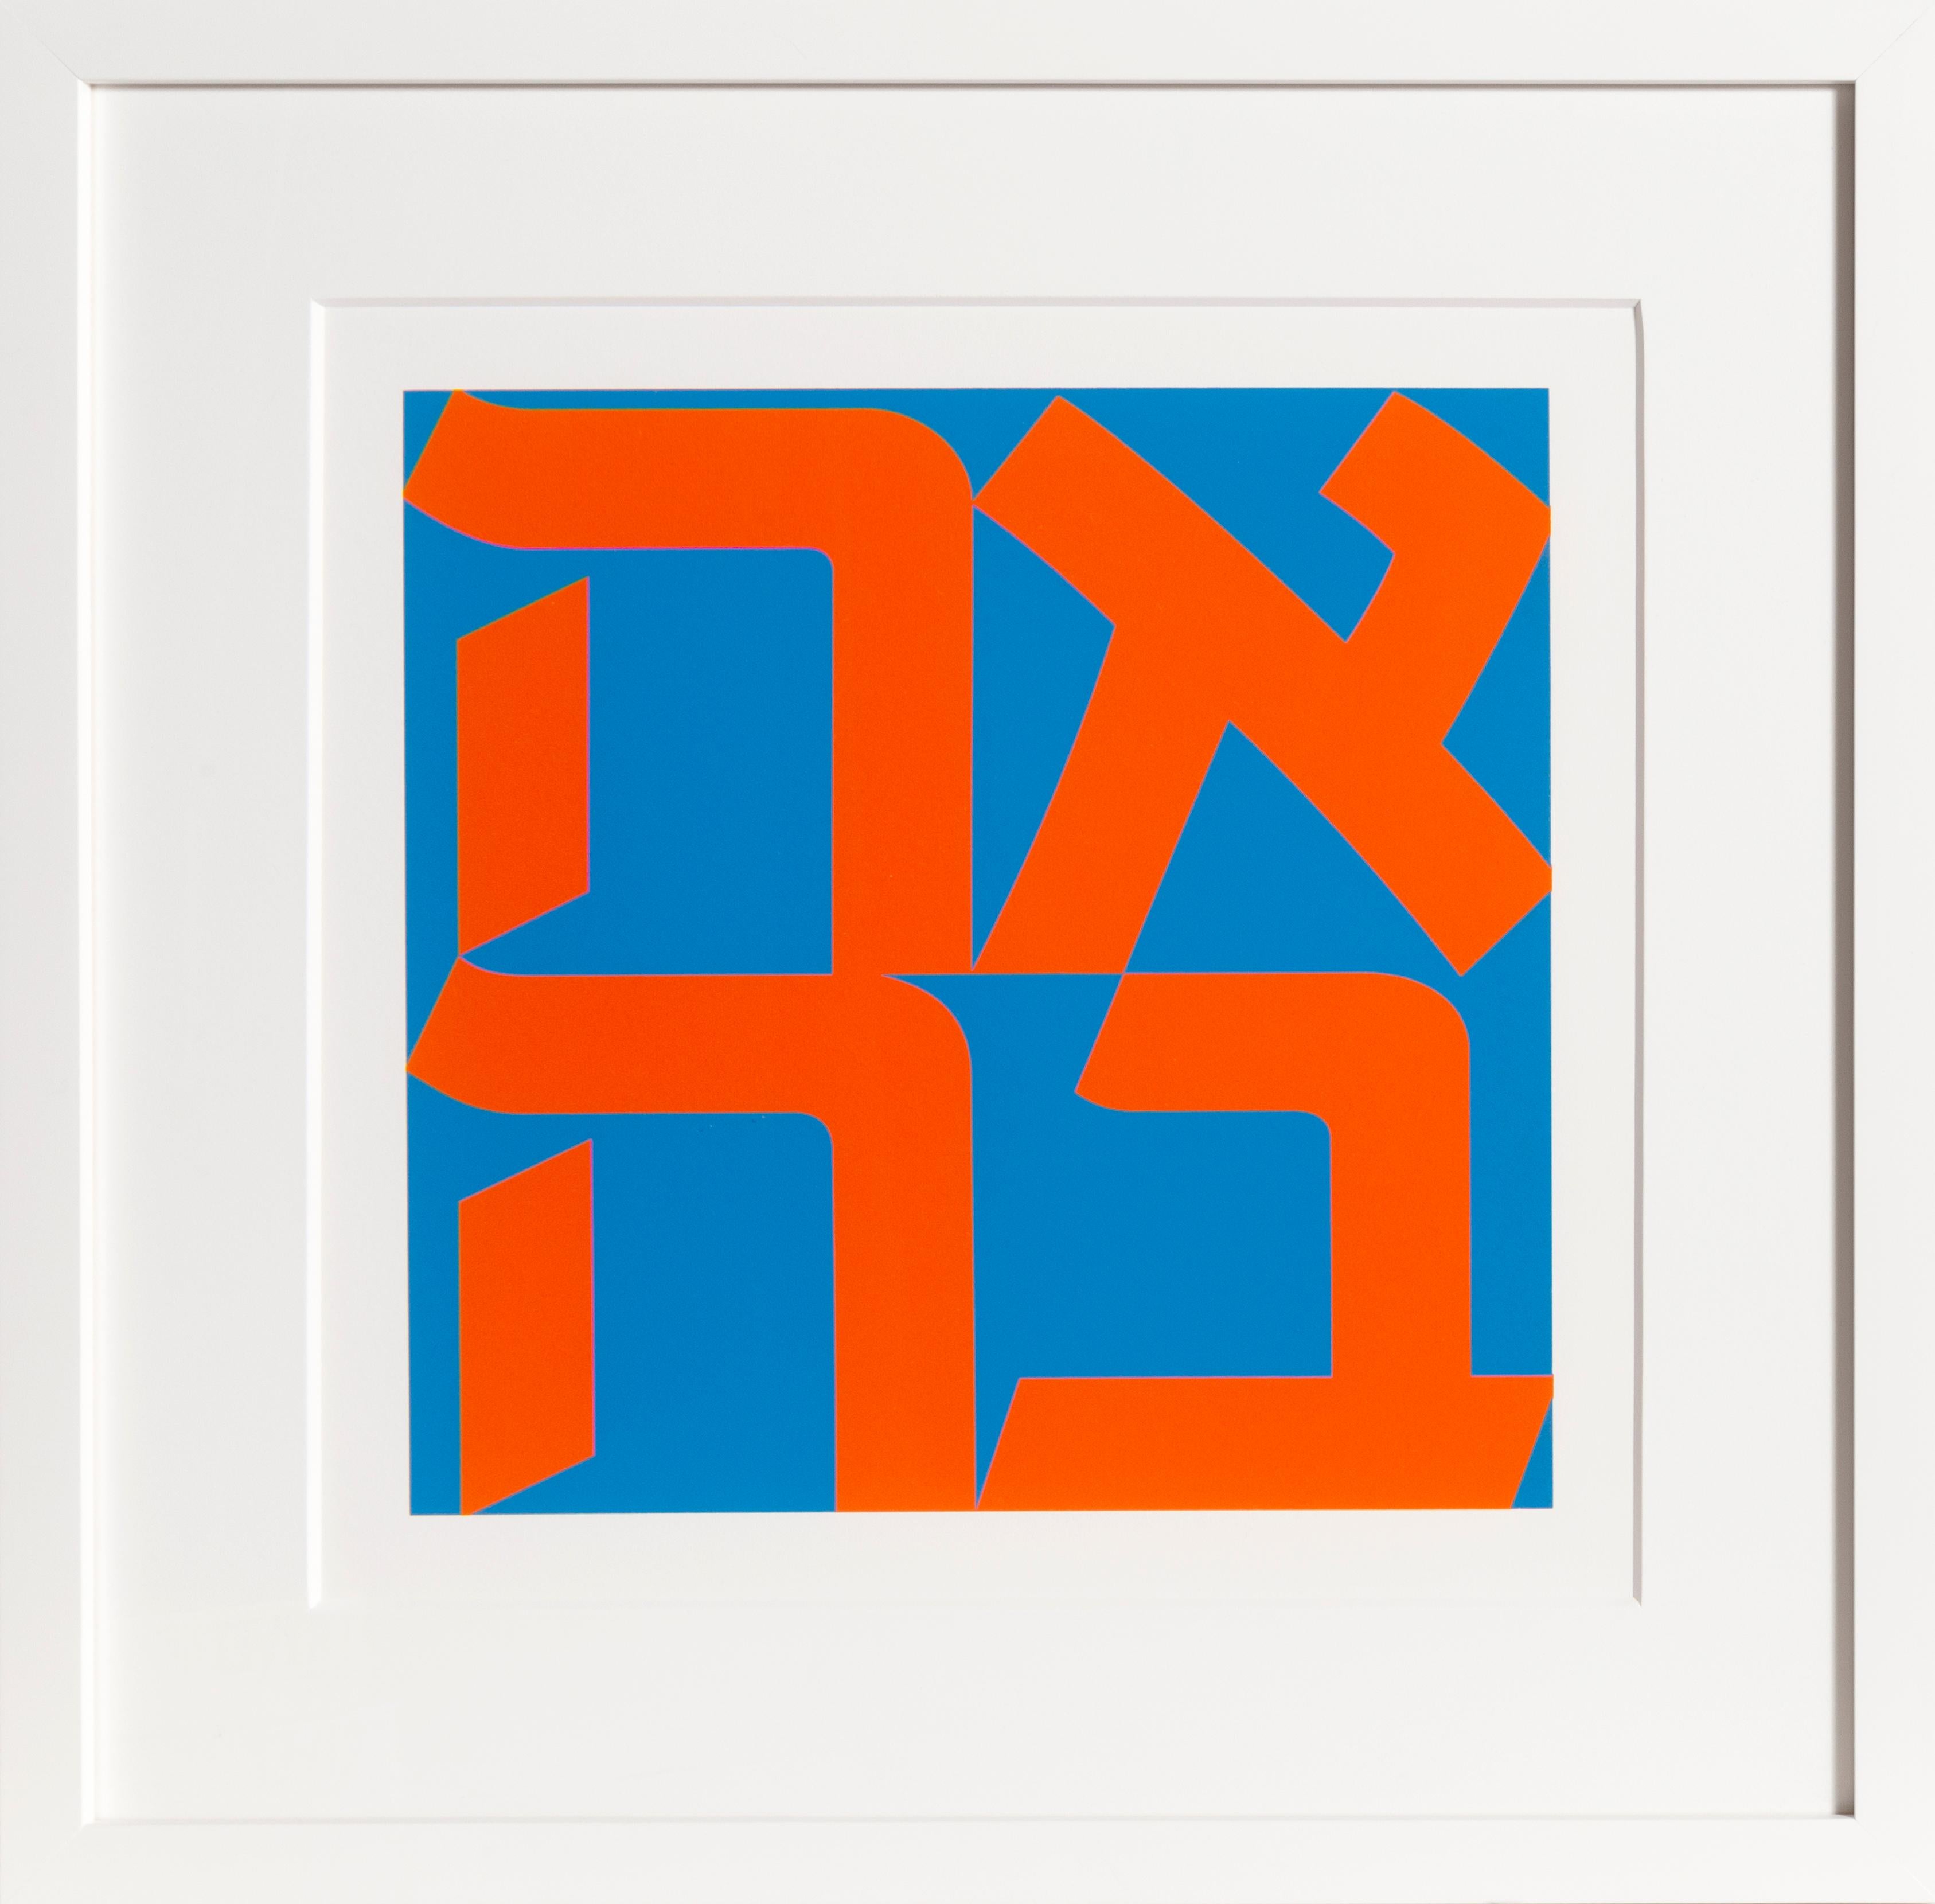 Artist: Robert Indiana, American (1928 - 2018)
Title: Ahava from the American Dream Portfolio
Year: 1978 (1997)
Medium: Serigraph
Edition Size: 395
Image Size: 14 x 14 inches
Size: 22 in. x 17 in. (55.88 cm x 43.18 cm)
Frame Size: 24 x 24